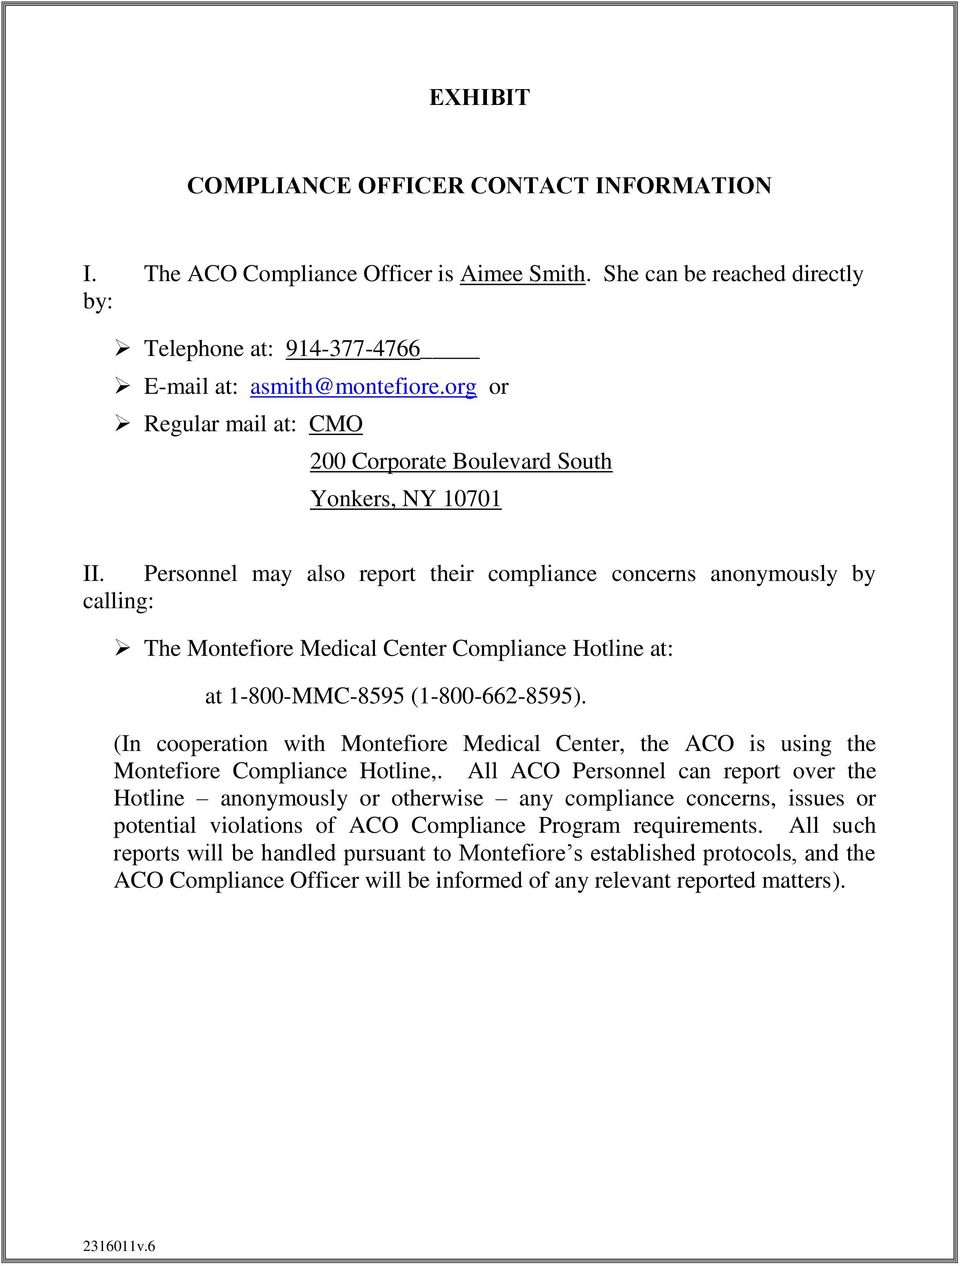 Personnel may also report their compliance concerns anonymously by calling: The Montefiore Medical Center Compliance Hotline at: at 1-800-MMC-8595 (1-800-662-8595).